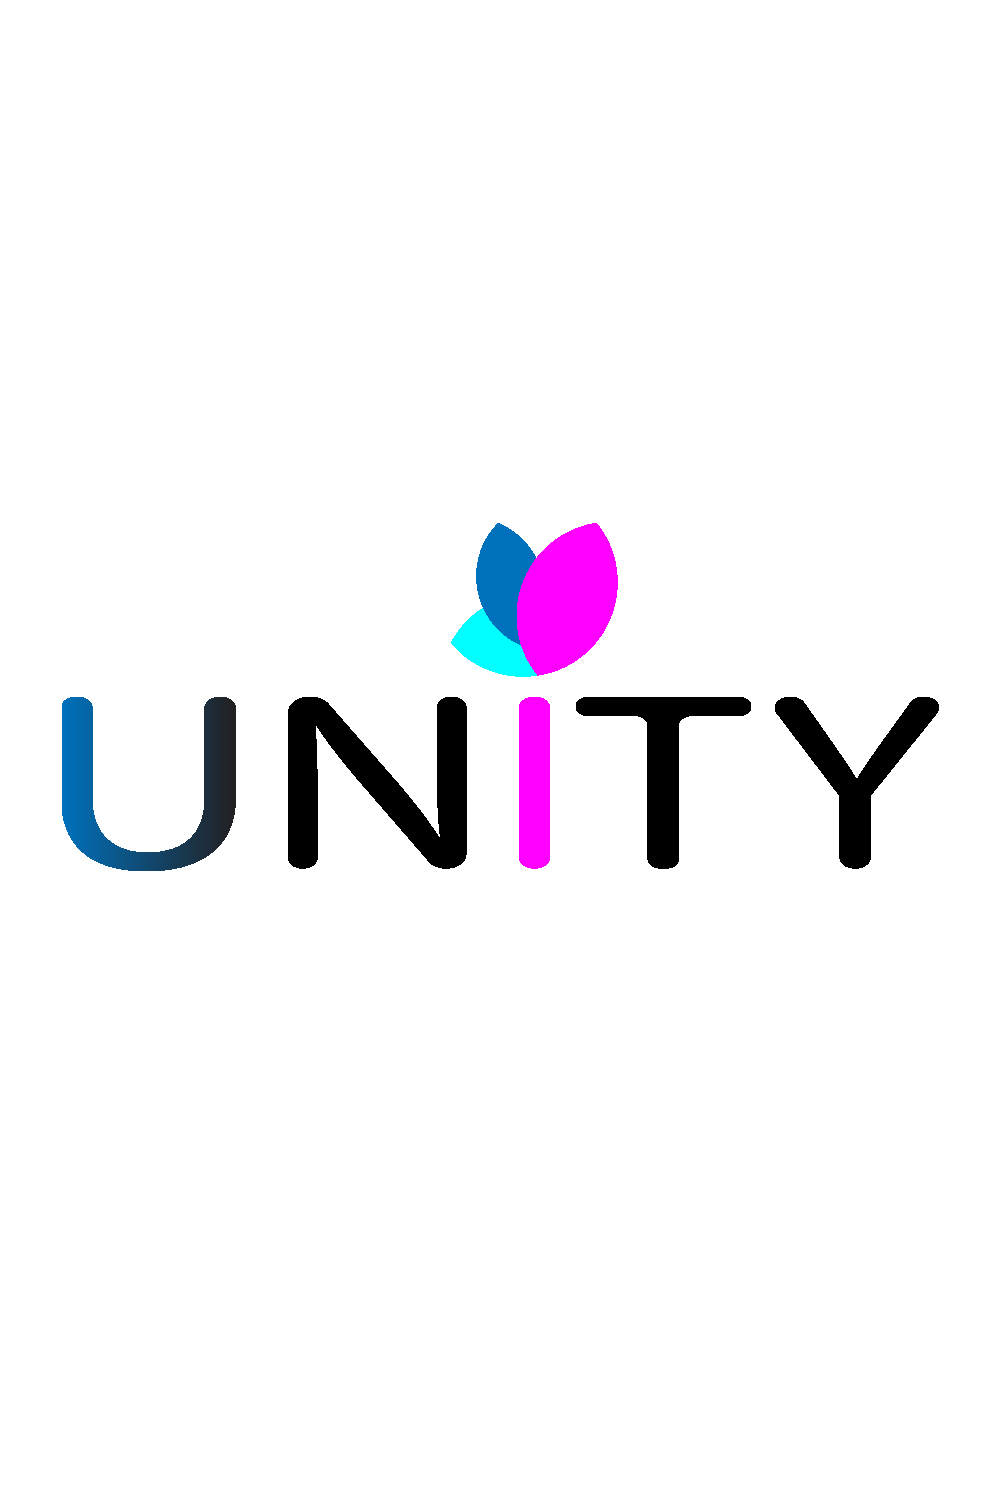 One-Fantastic-Unity Logo with High resolutions-only $5 pinterest preview image.